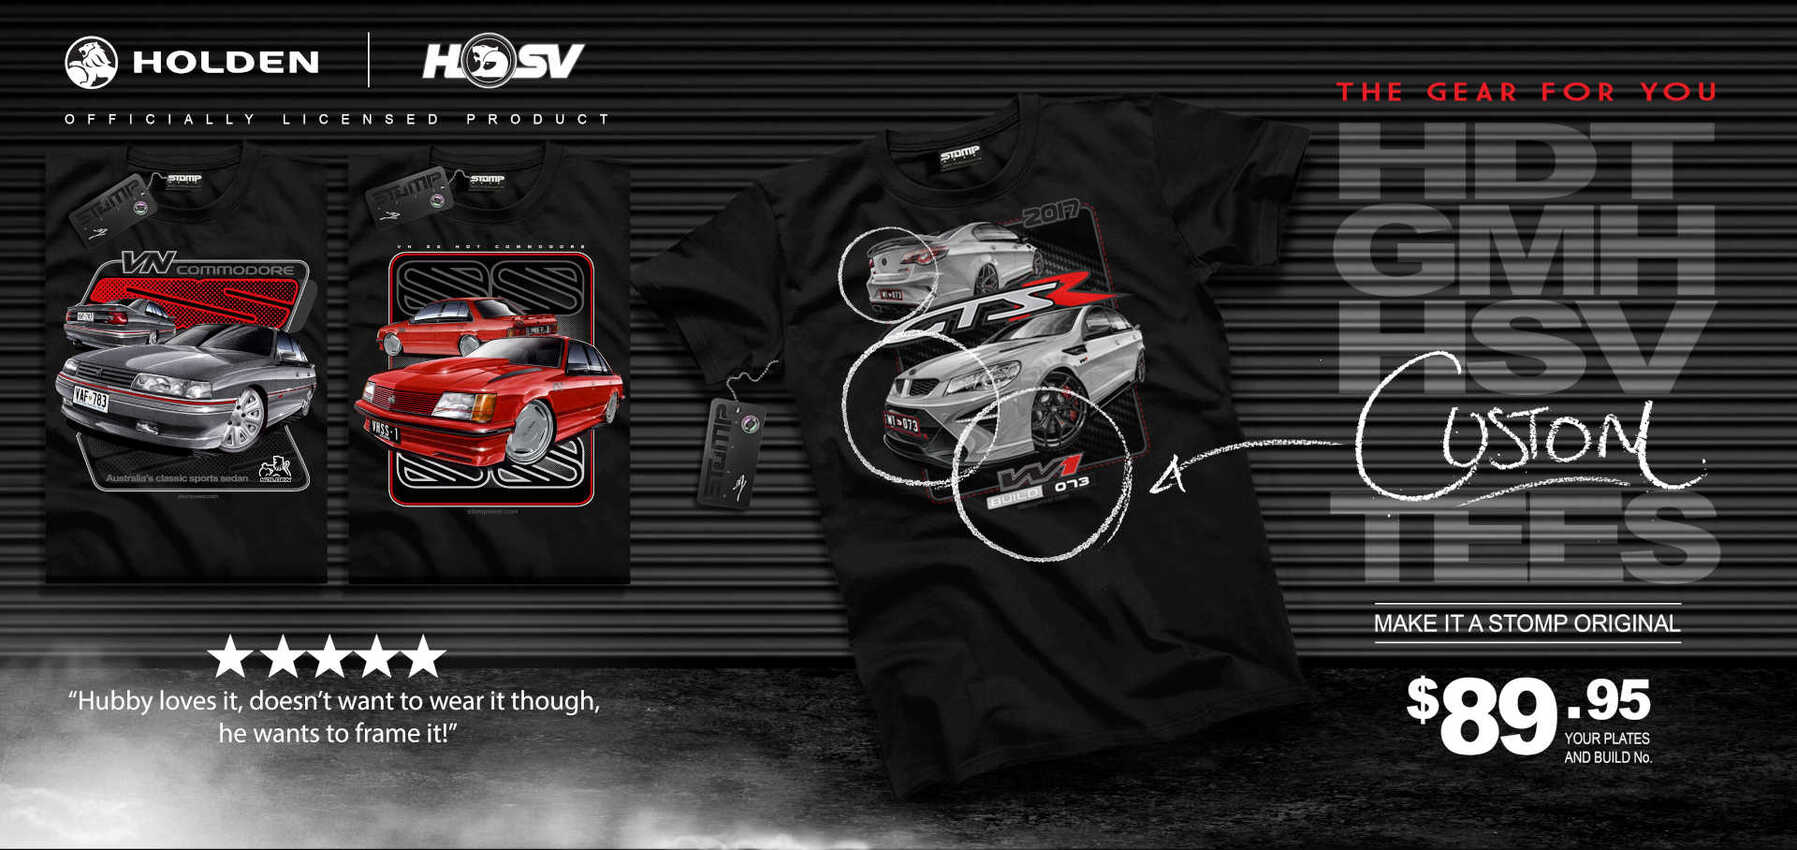 Personalised Holden and HSV Merchandise